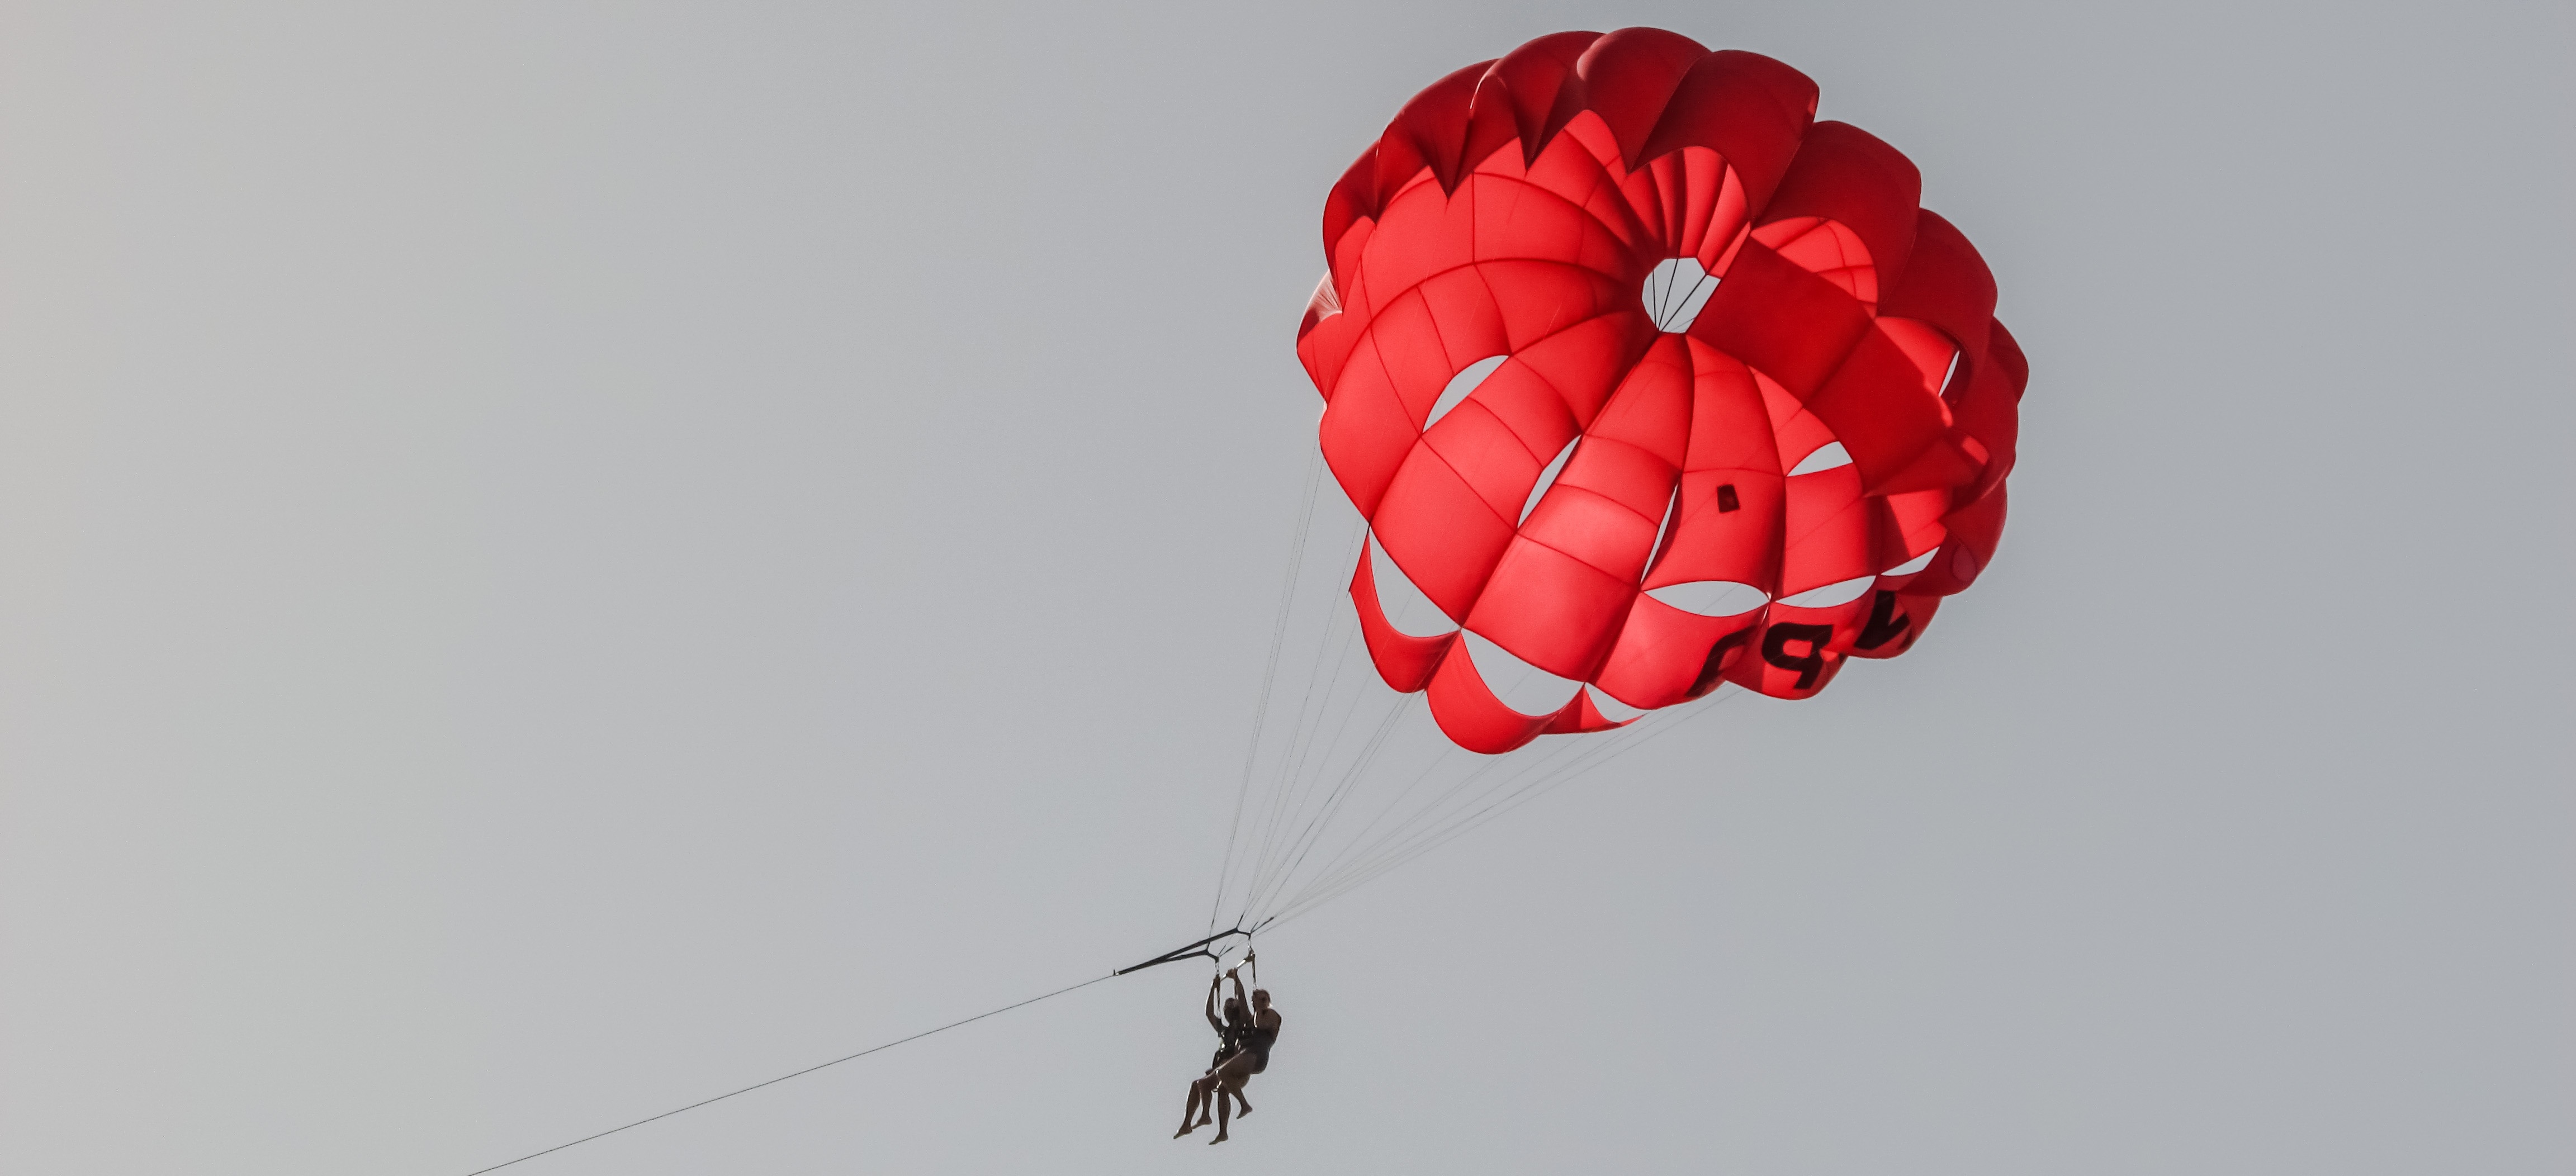 red parachute